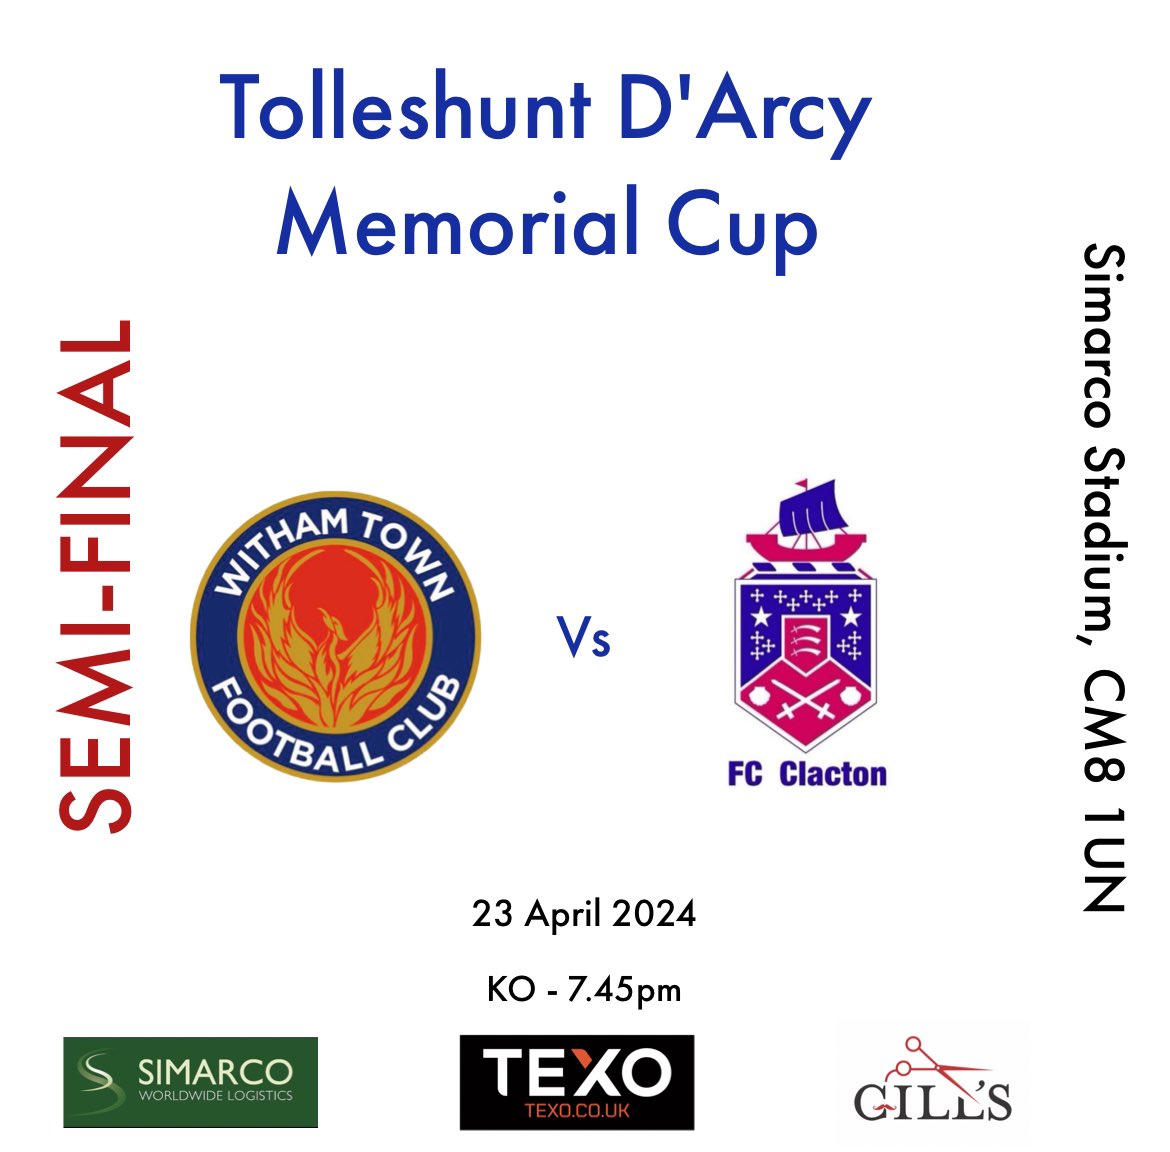 The Tolleshunt D’arcy Memoral Cup semi final against @FC_Clacton will now be played on Tuesday 23 April. KO - 7.45pm.